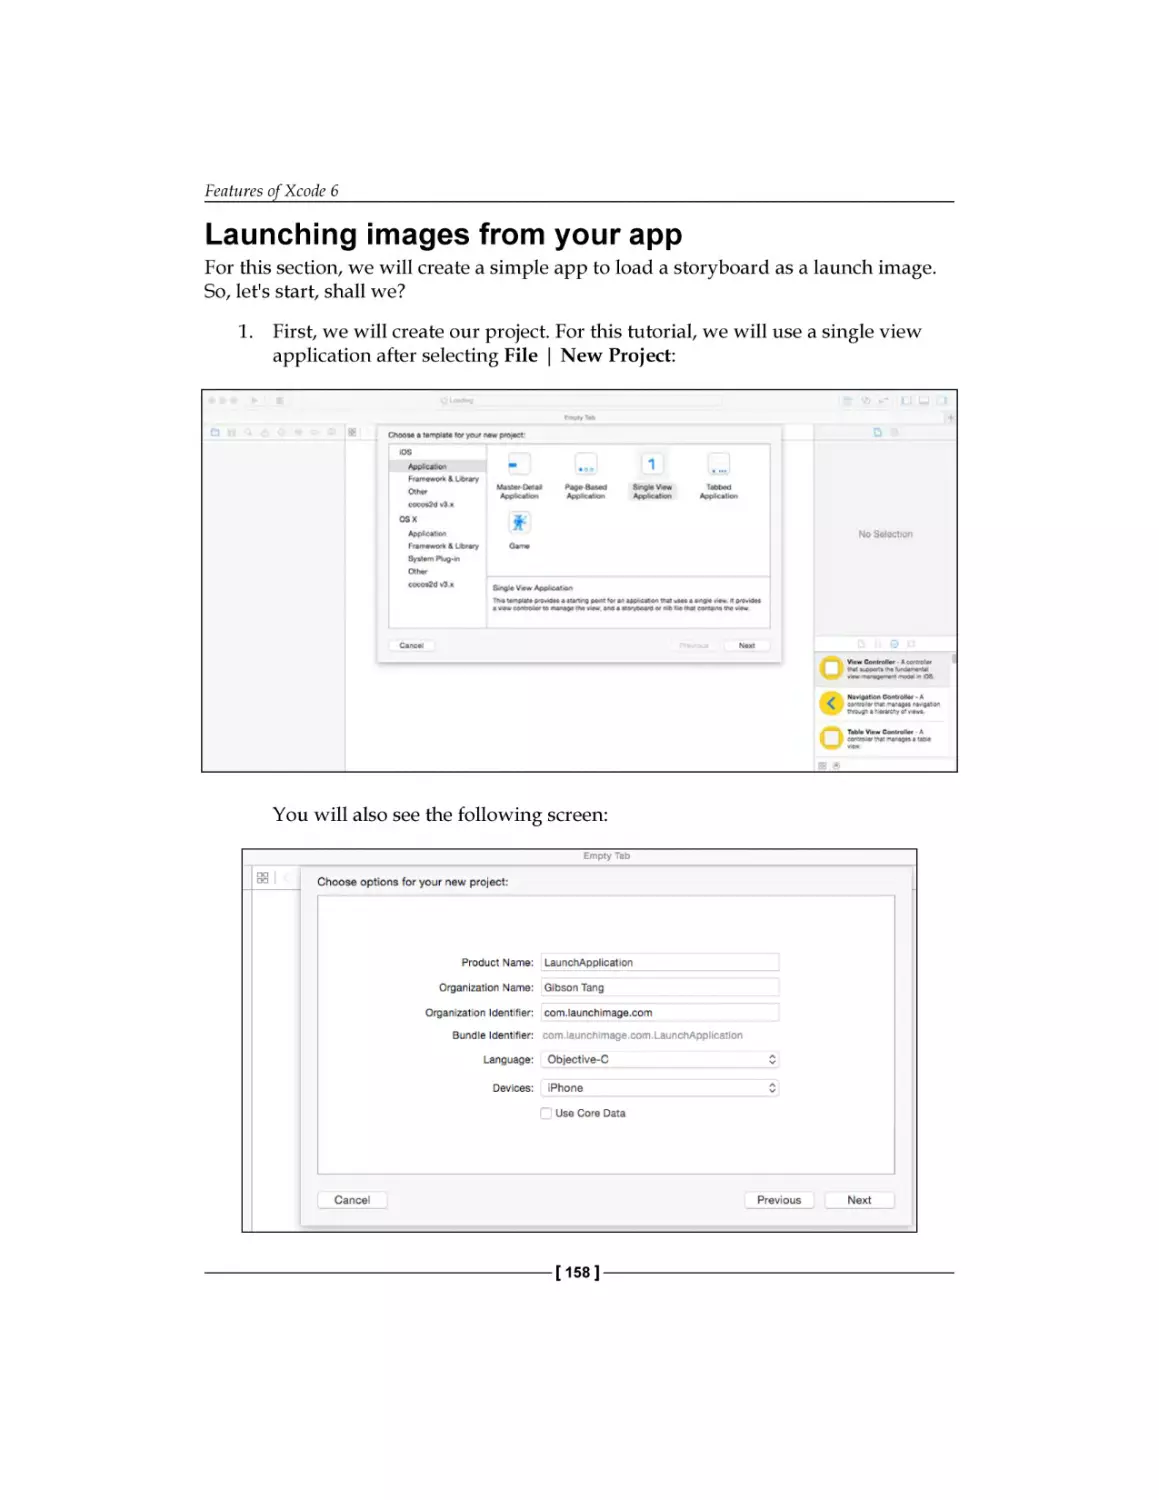 Launching images from your app